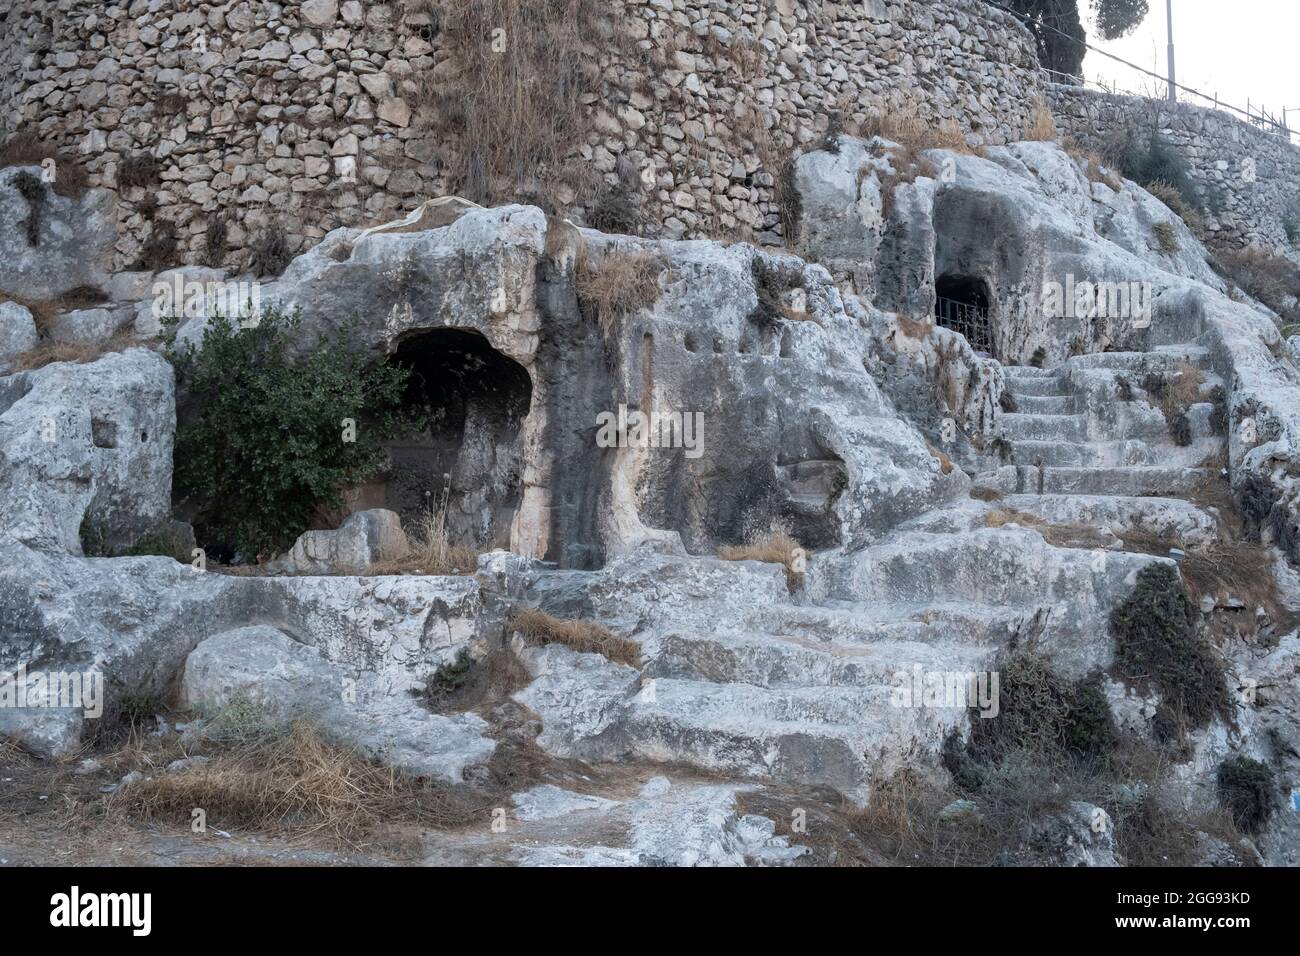 View of ancient rock cut burial chambers that were reused by generations of families from as early as the seventh until the fifth century BC in Valley of Hinnom the modern name for the biblical Gehenna or Gehinnom valley surrounding Jerusalem's Old City, Israel Stock Photo